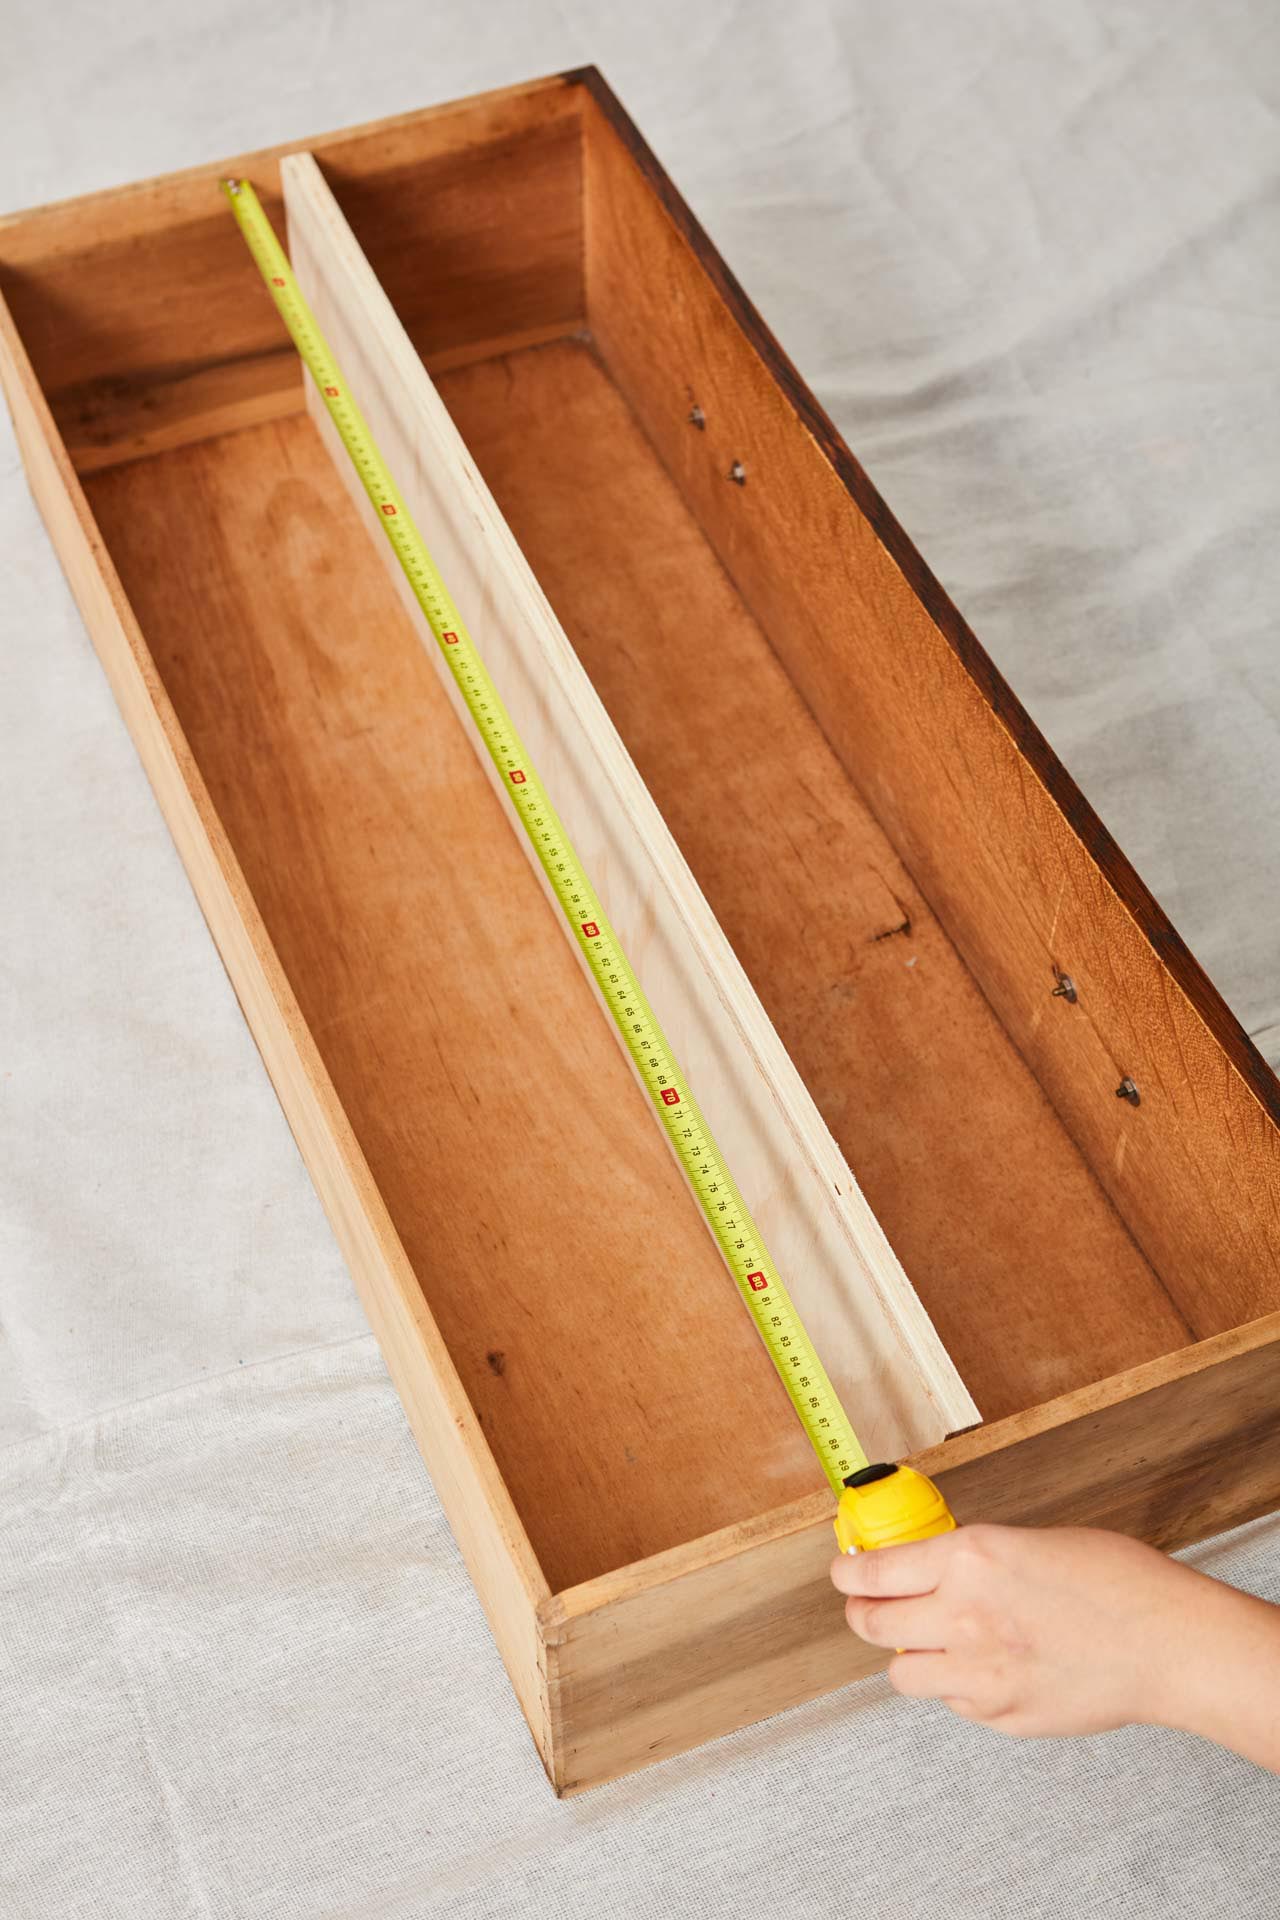 Vintage drawer being measured by yellow measuring tape